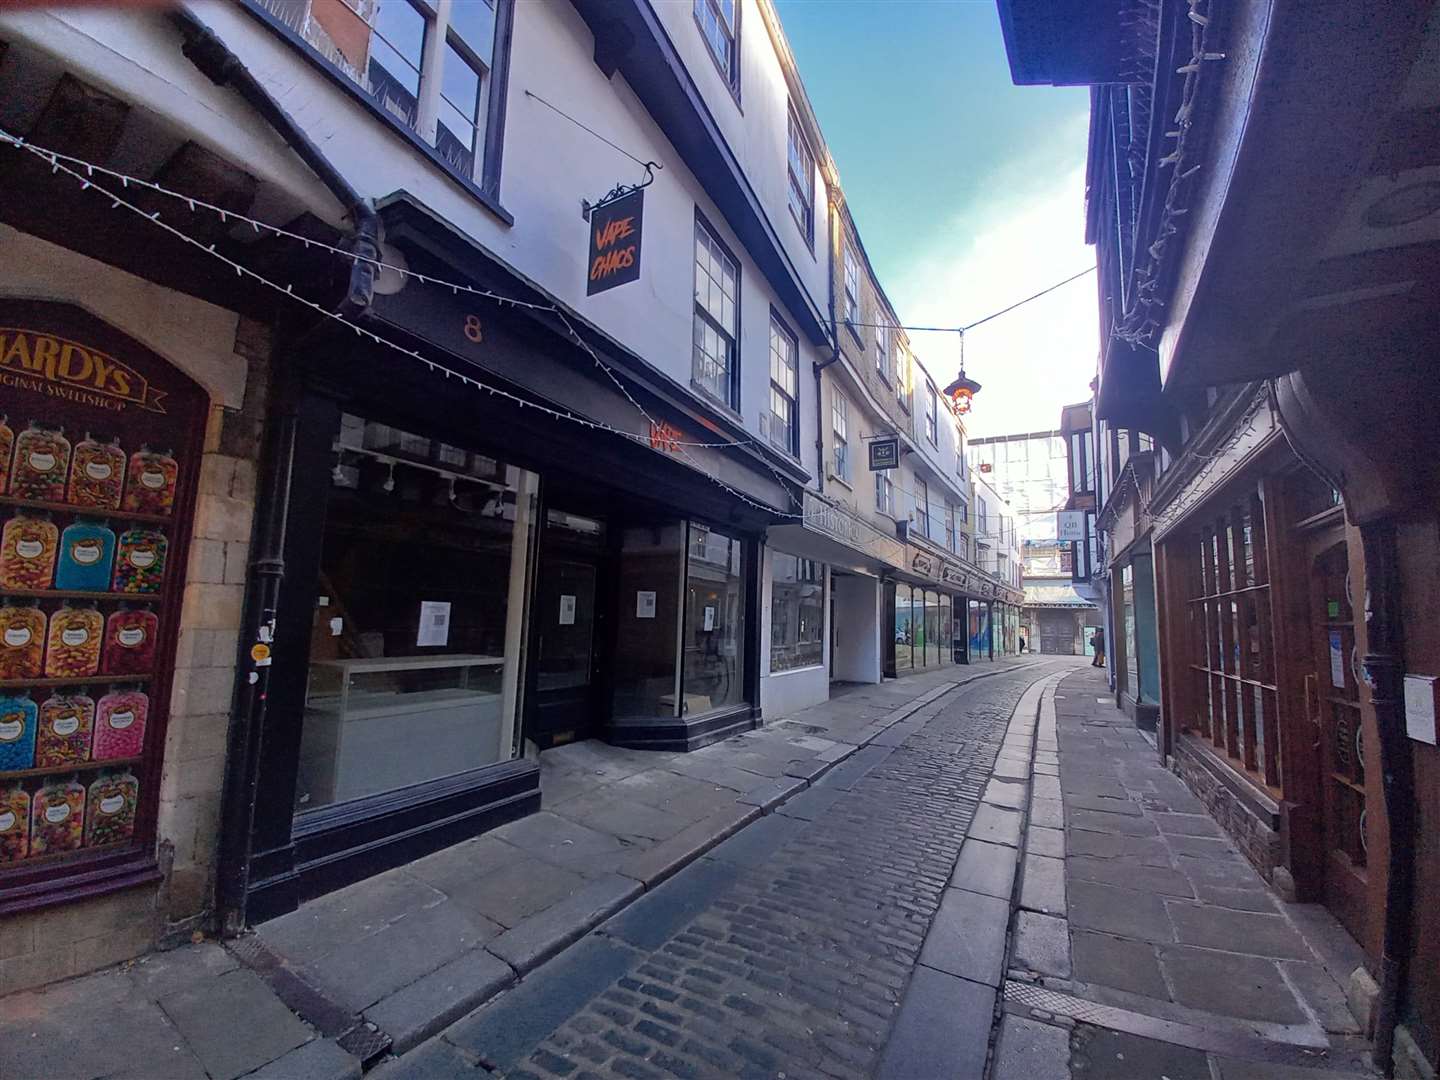 Mercery Lane is one of the county's most recognisable streets, yet half of the shops are empty